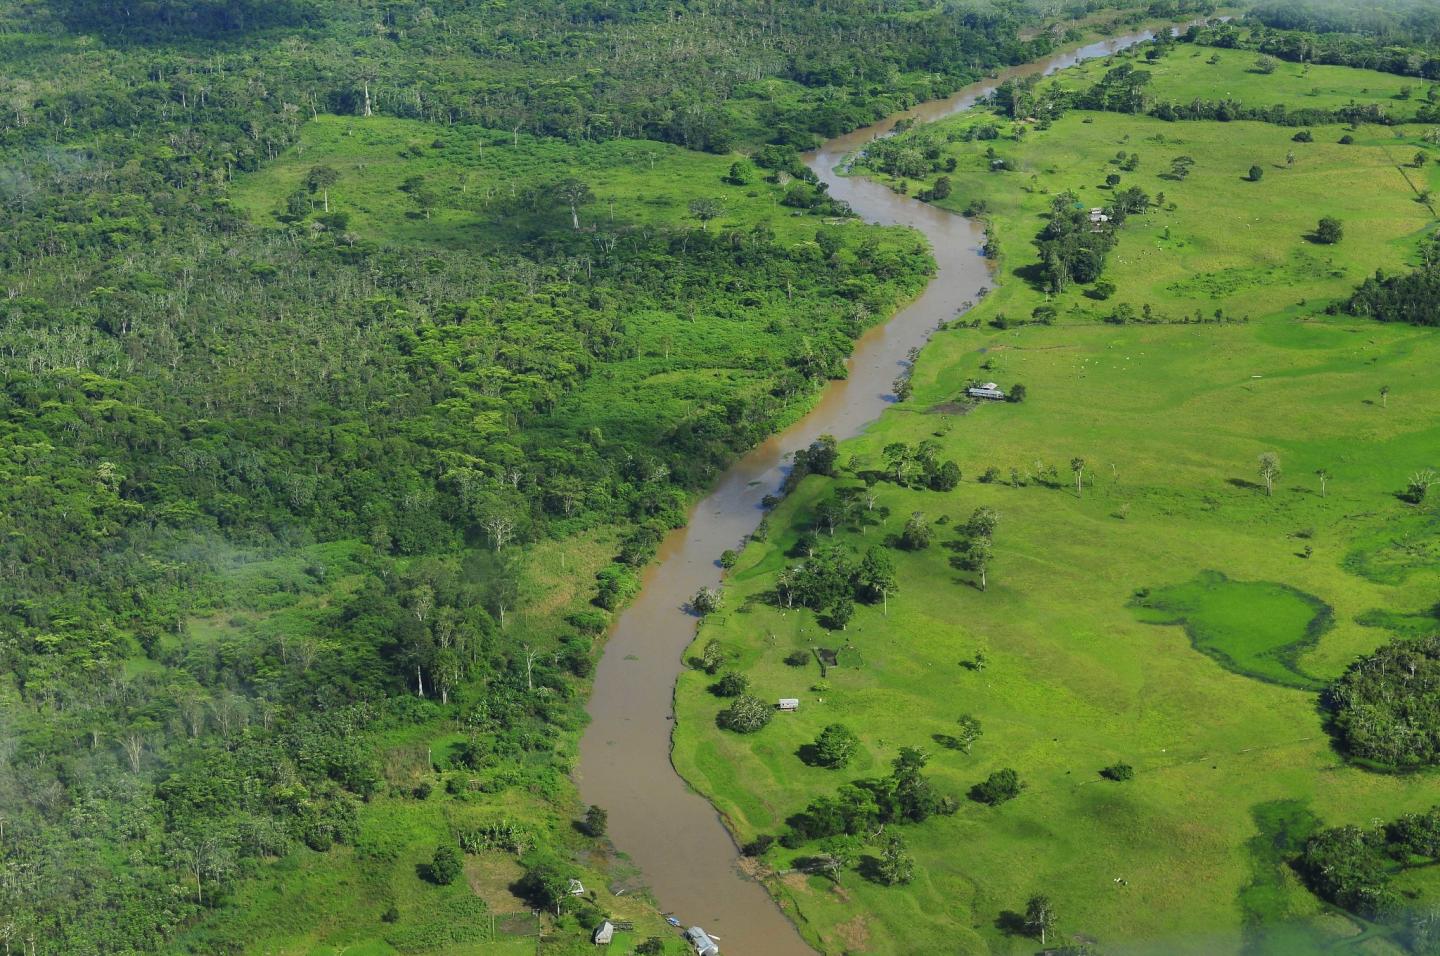 Amazon rainforest and agriculture